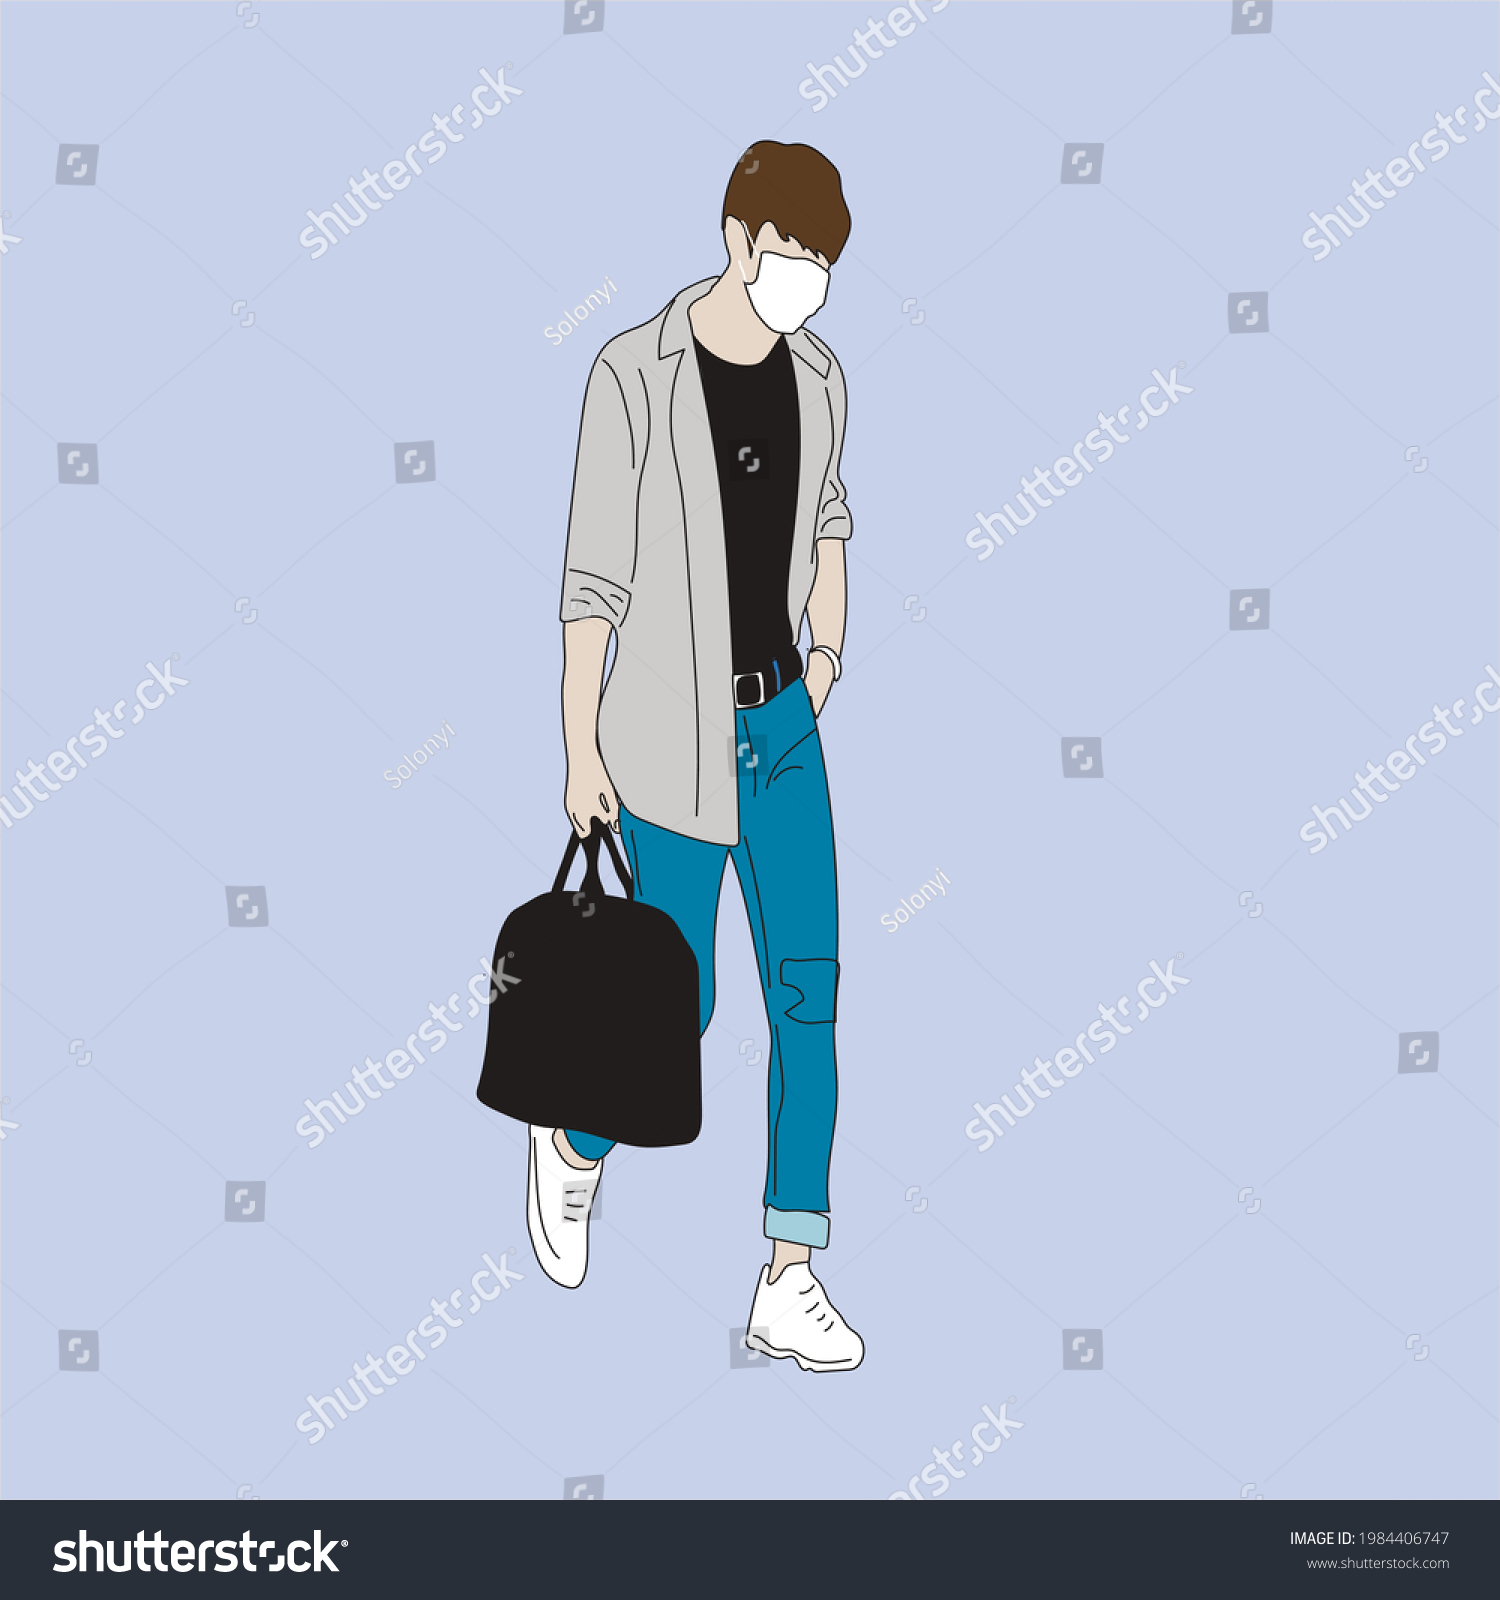 SVG of Vector illustration of Kpop street fashion. Street idols of Koreans. Kpop men's fashion idol. A guy in blue jeans and a gray hoodie and a white mask. svg